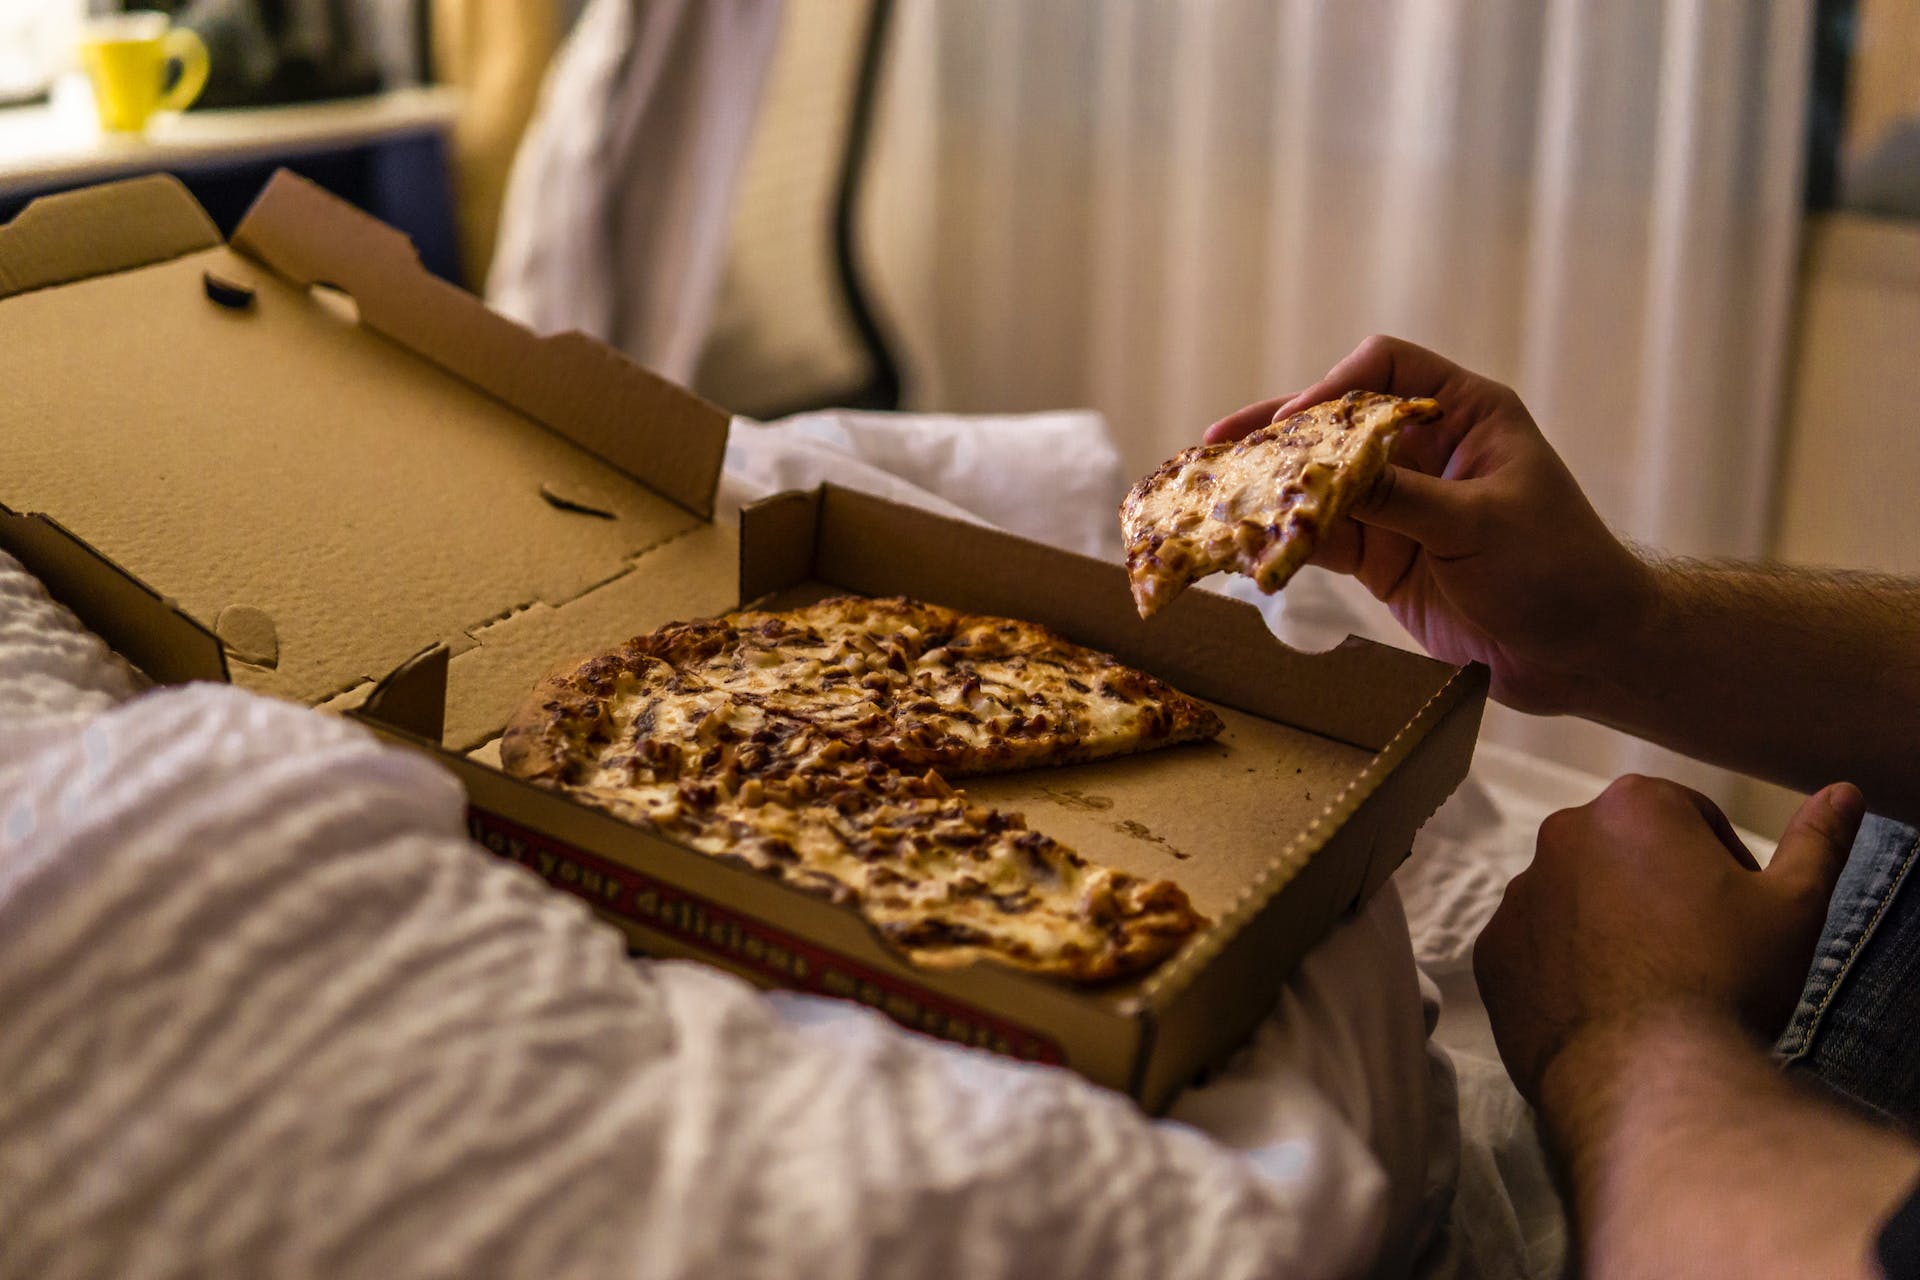 A man having pizza on his bed | Source: Pexels